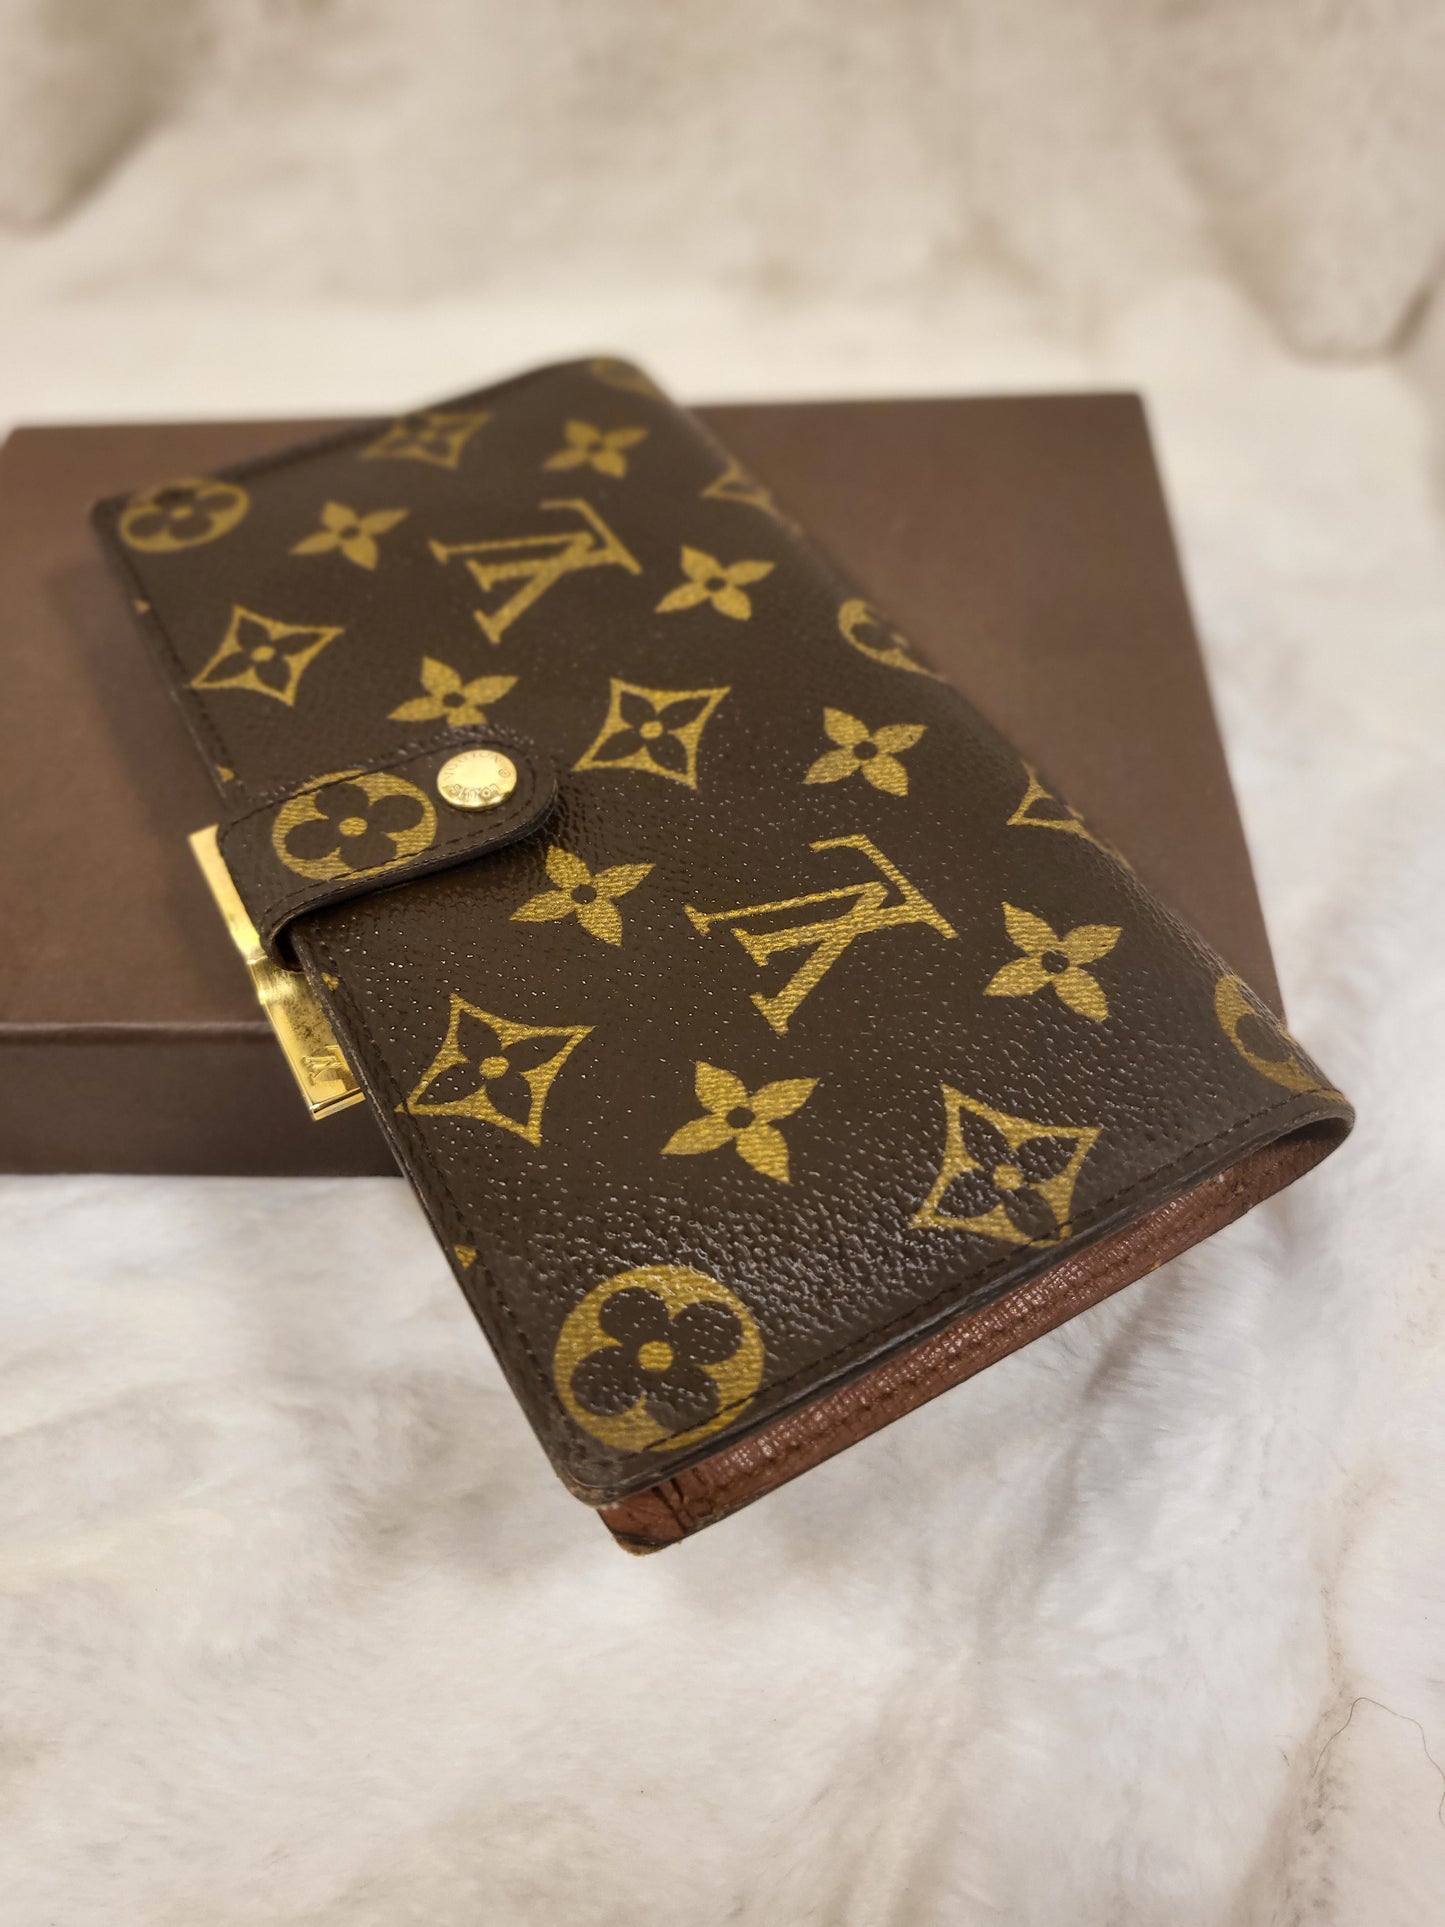 Authentic pre-owned Louis Vuitton Continental wallet